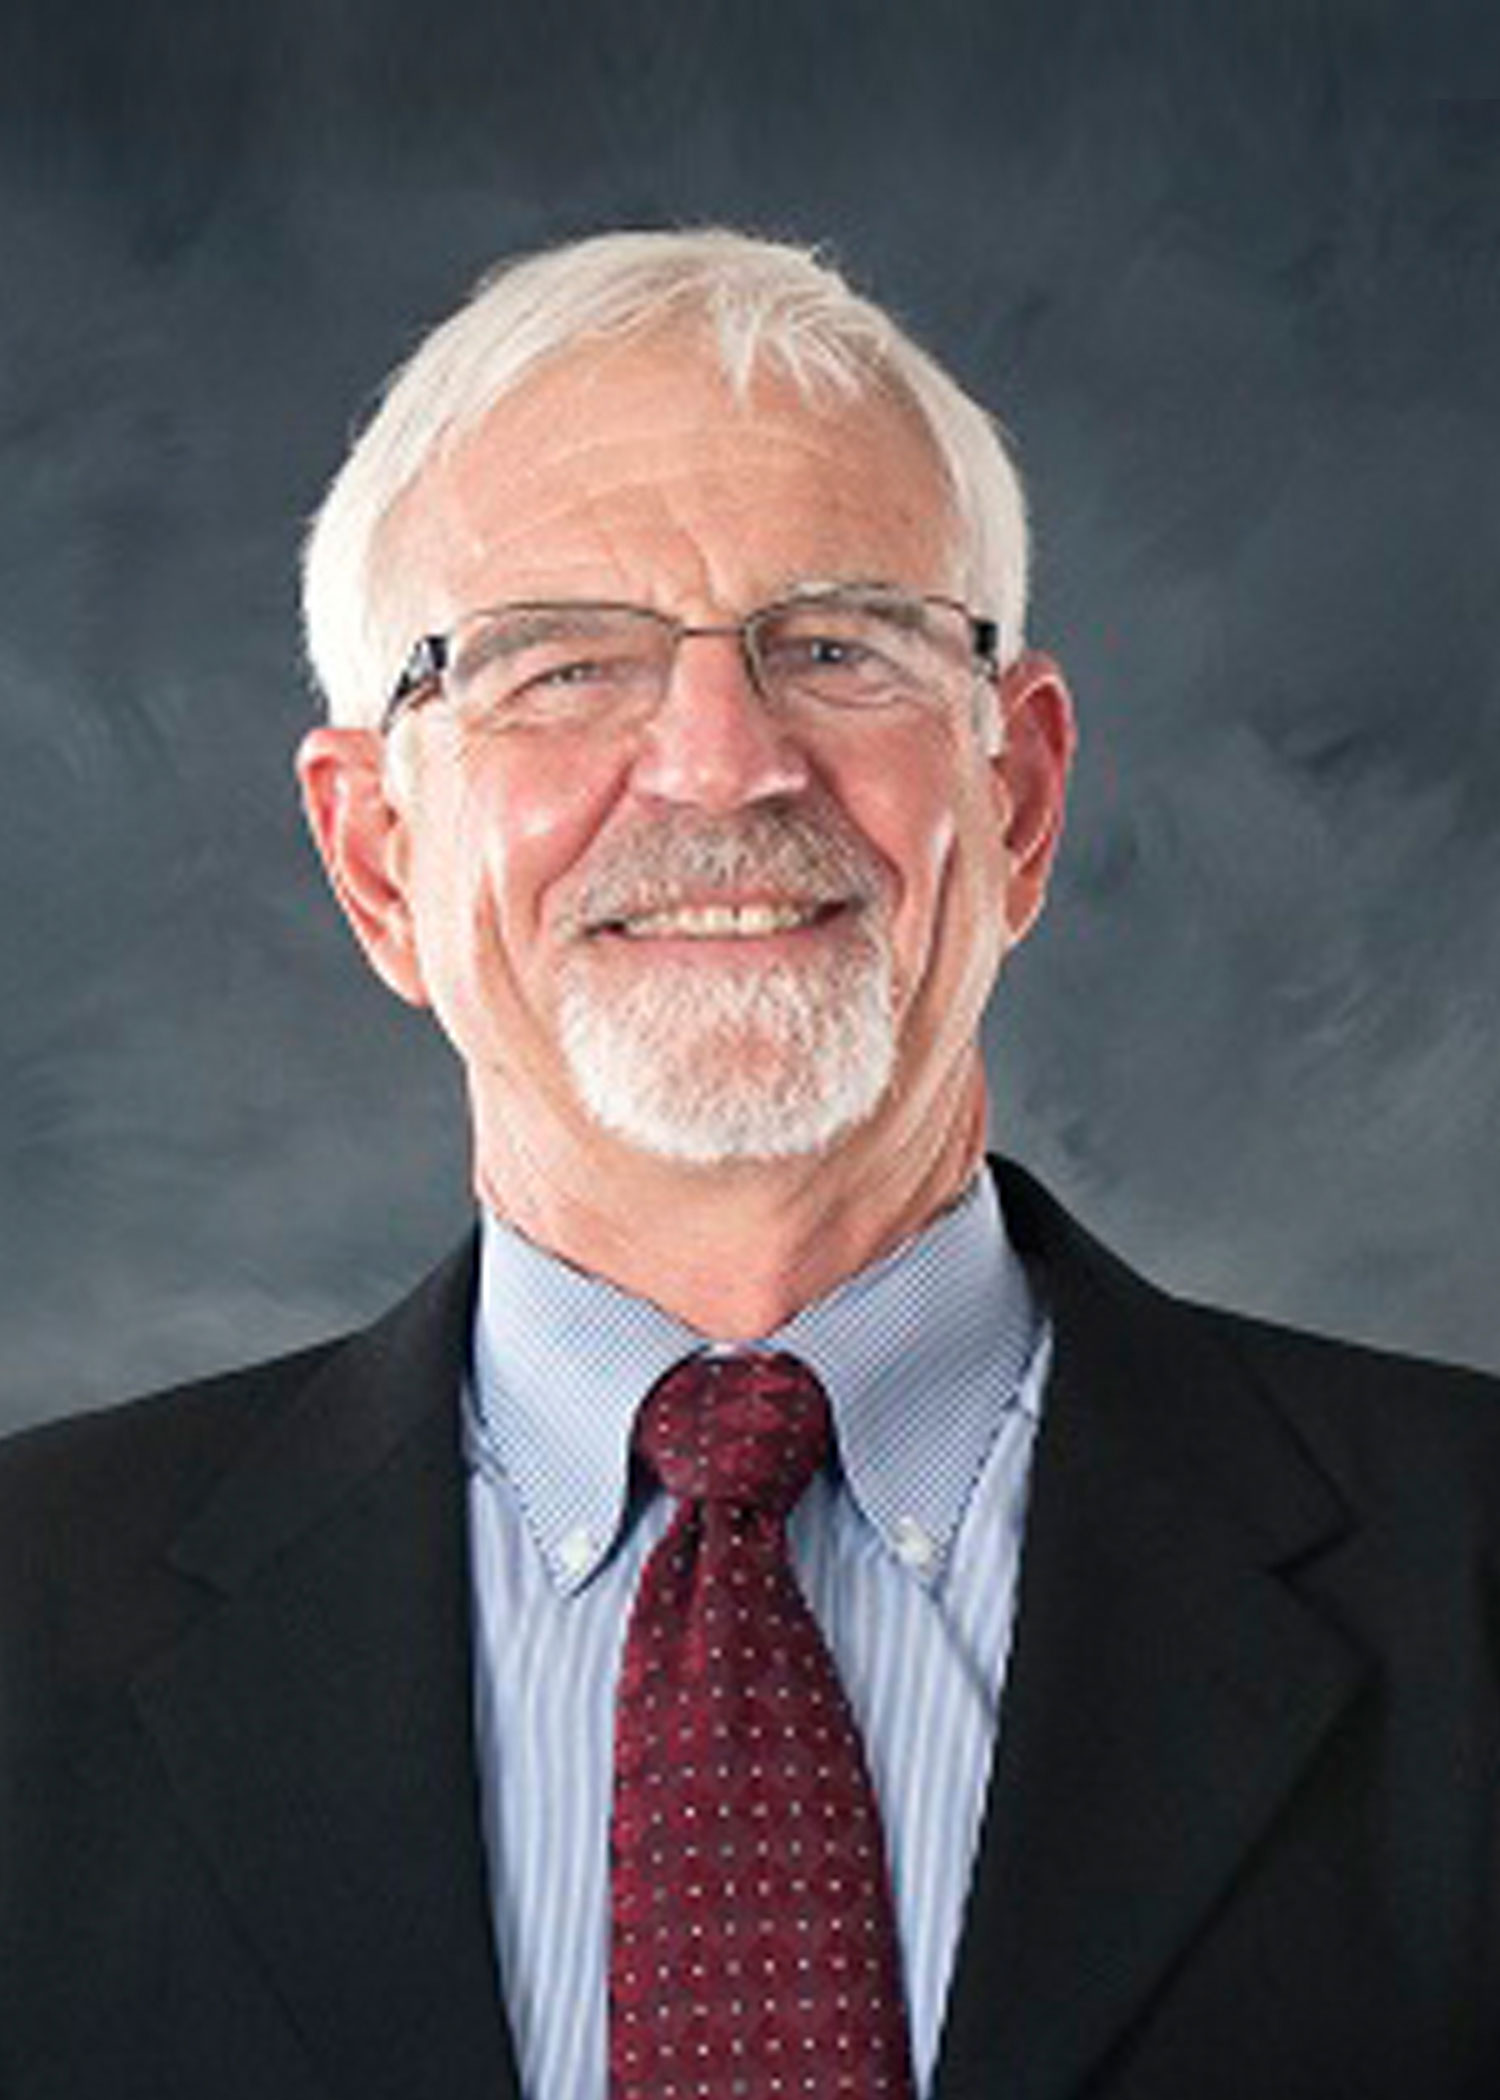 Professional photo of Bill Cooke, wearing a black suit and red tie against a gray background.